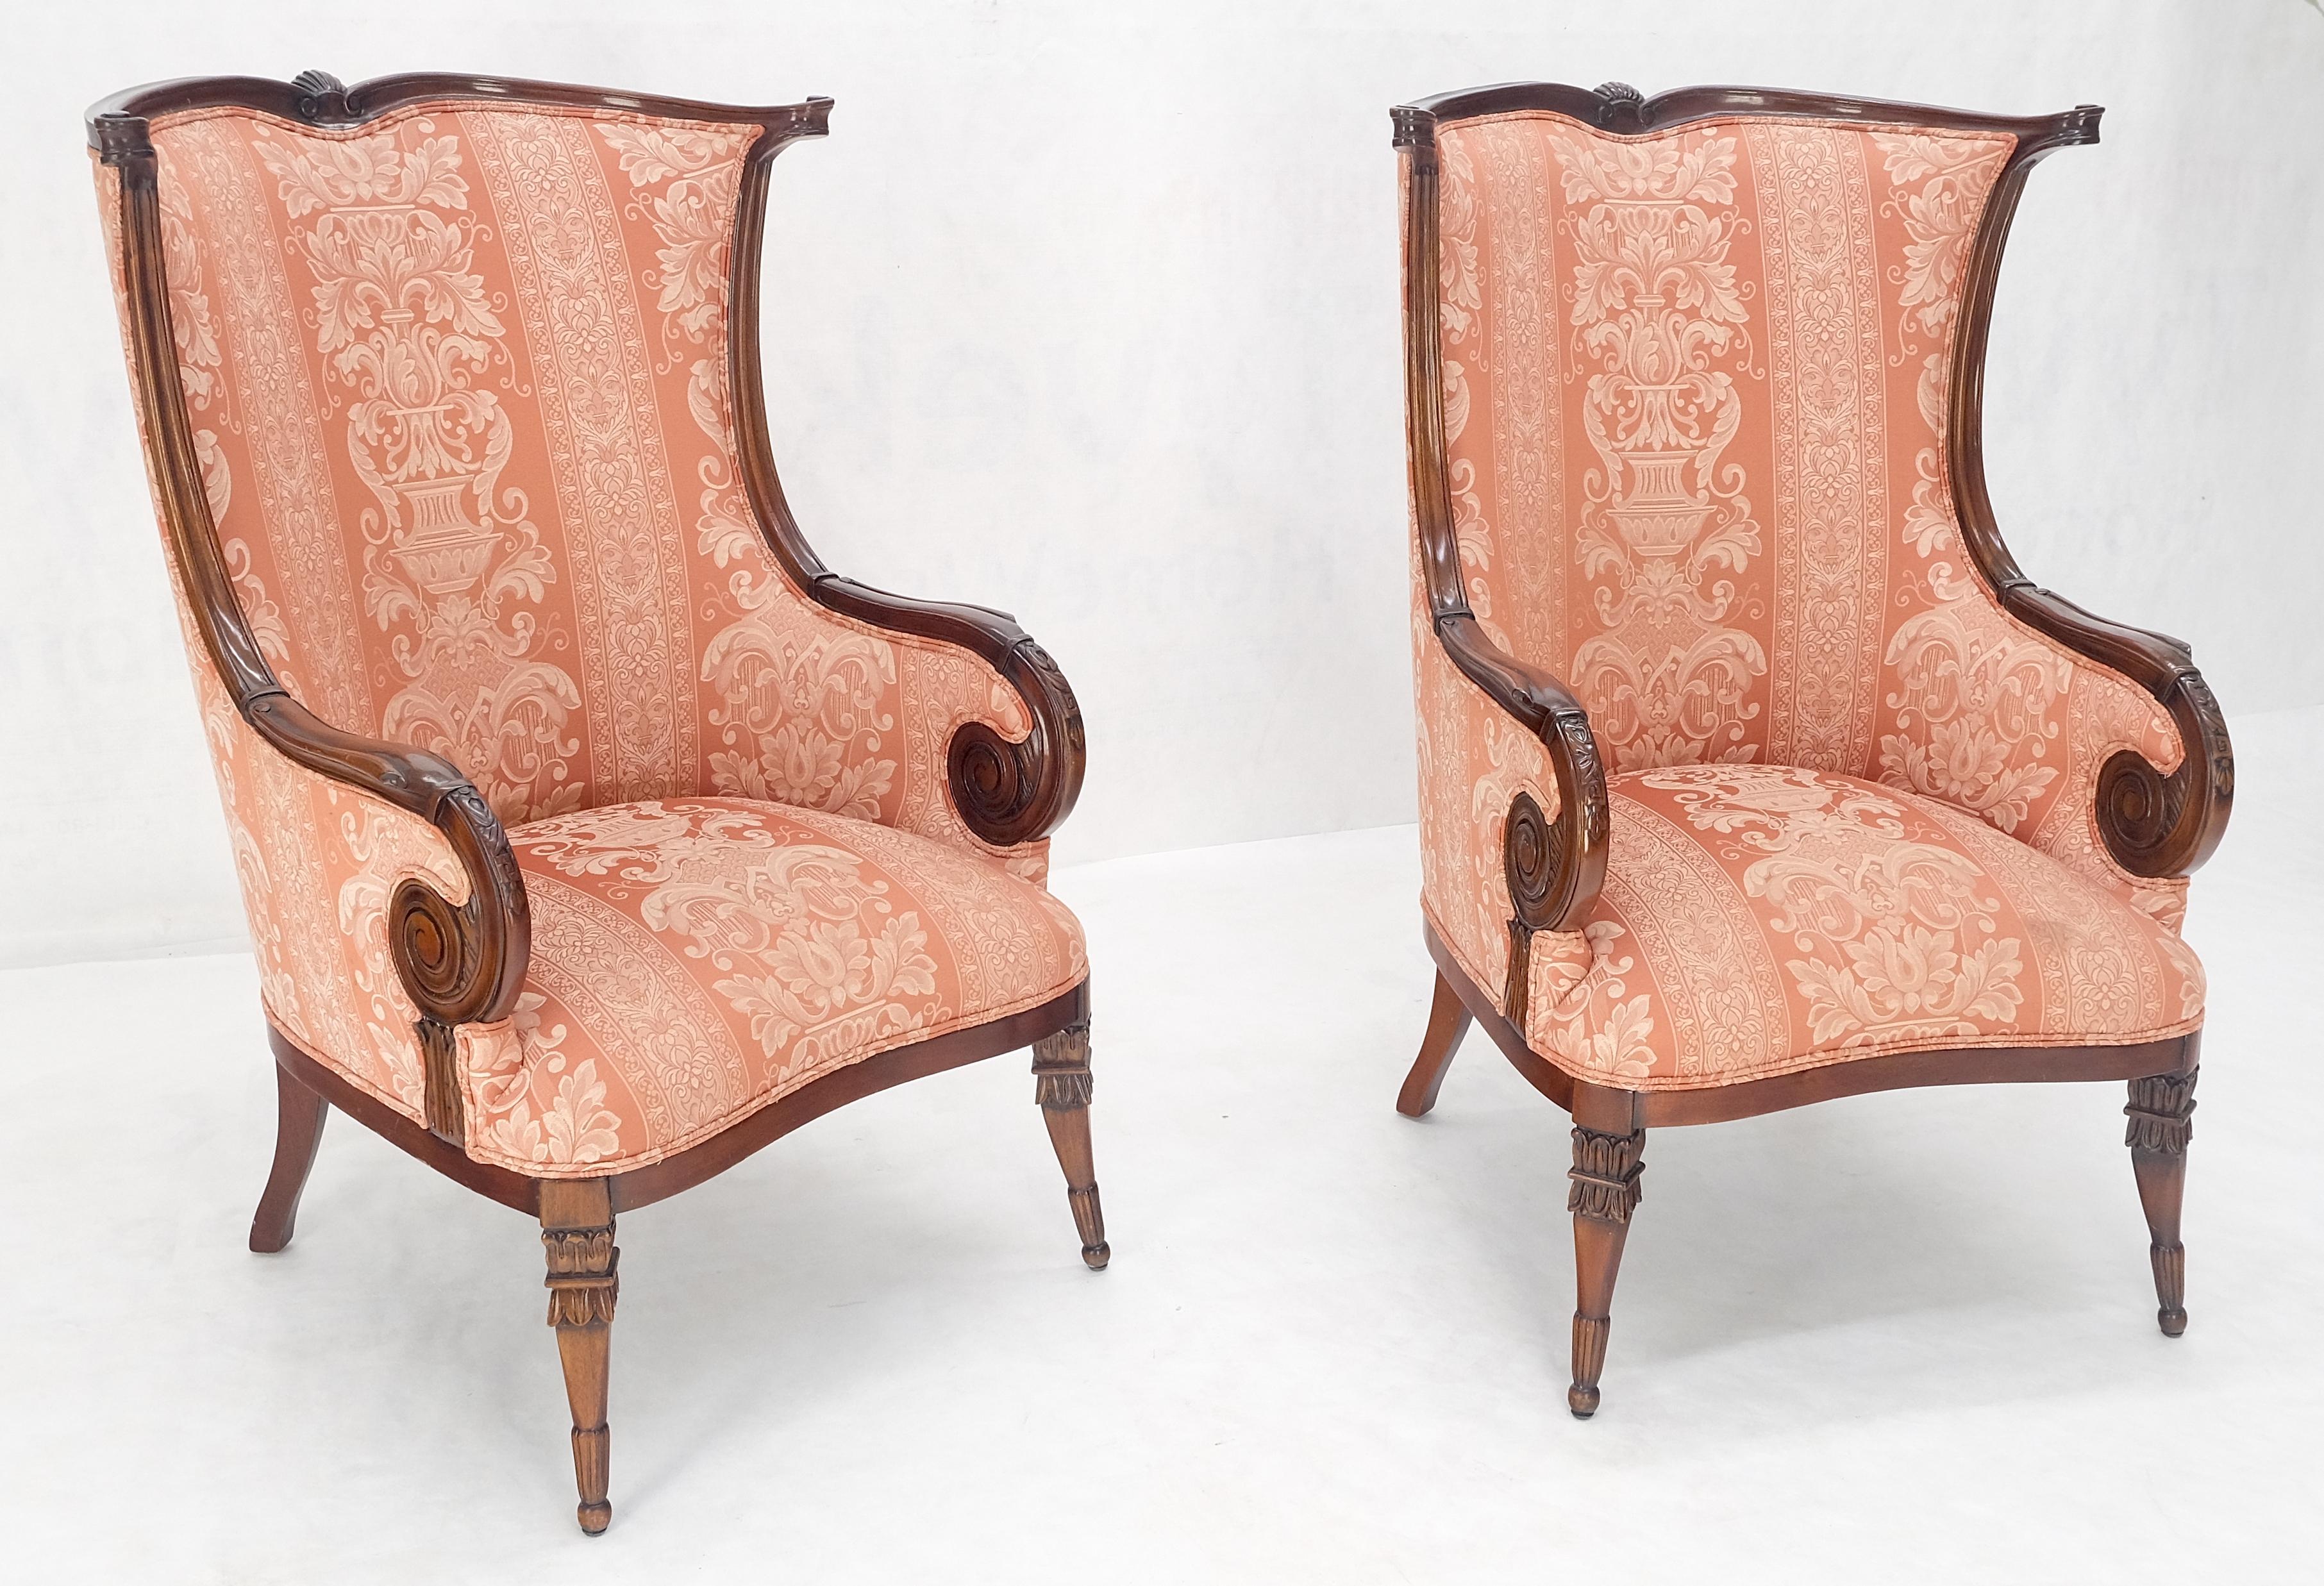 Pair of Fine Carved Mahogany Cream Silk Like Upholstery Regency Fire Side Chairs For Sale 6